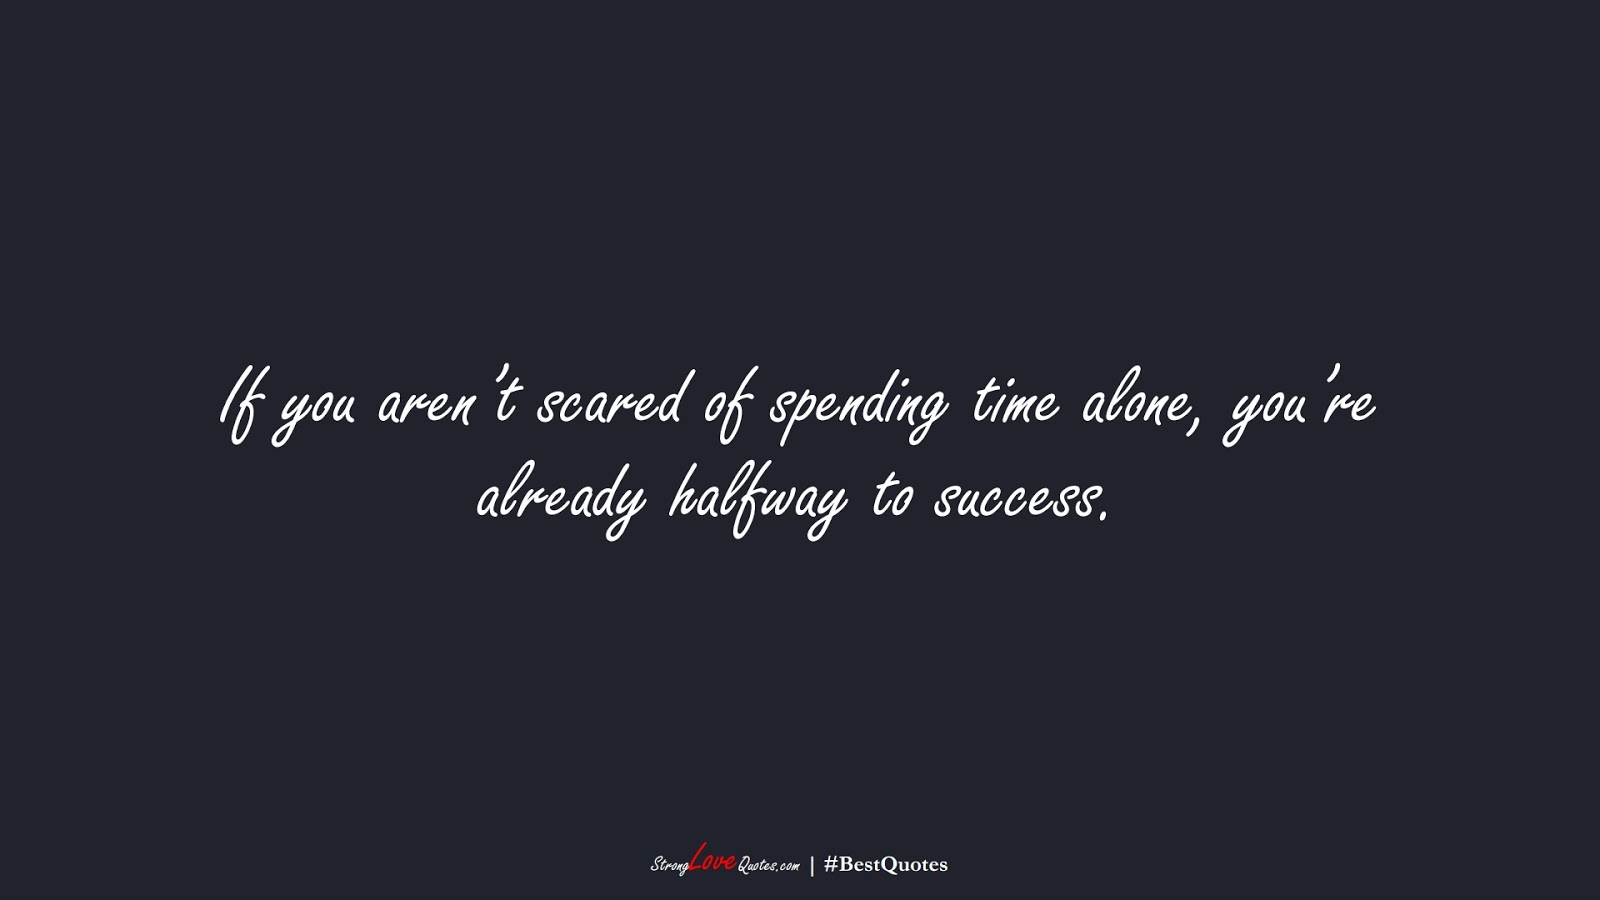 If you aren’t scared of spending time alone, you’re already halfway to success.FALSE